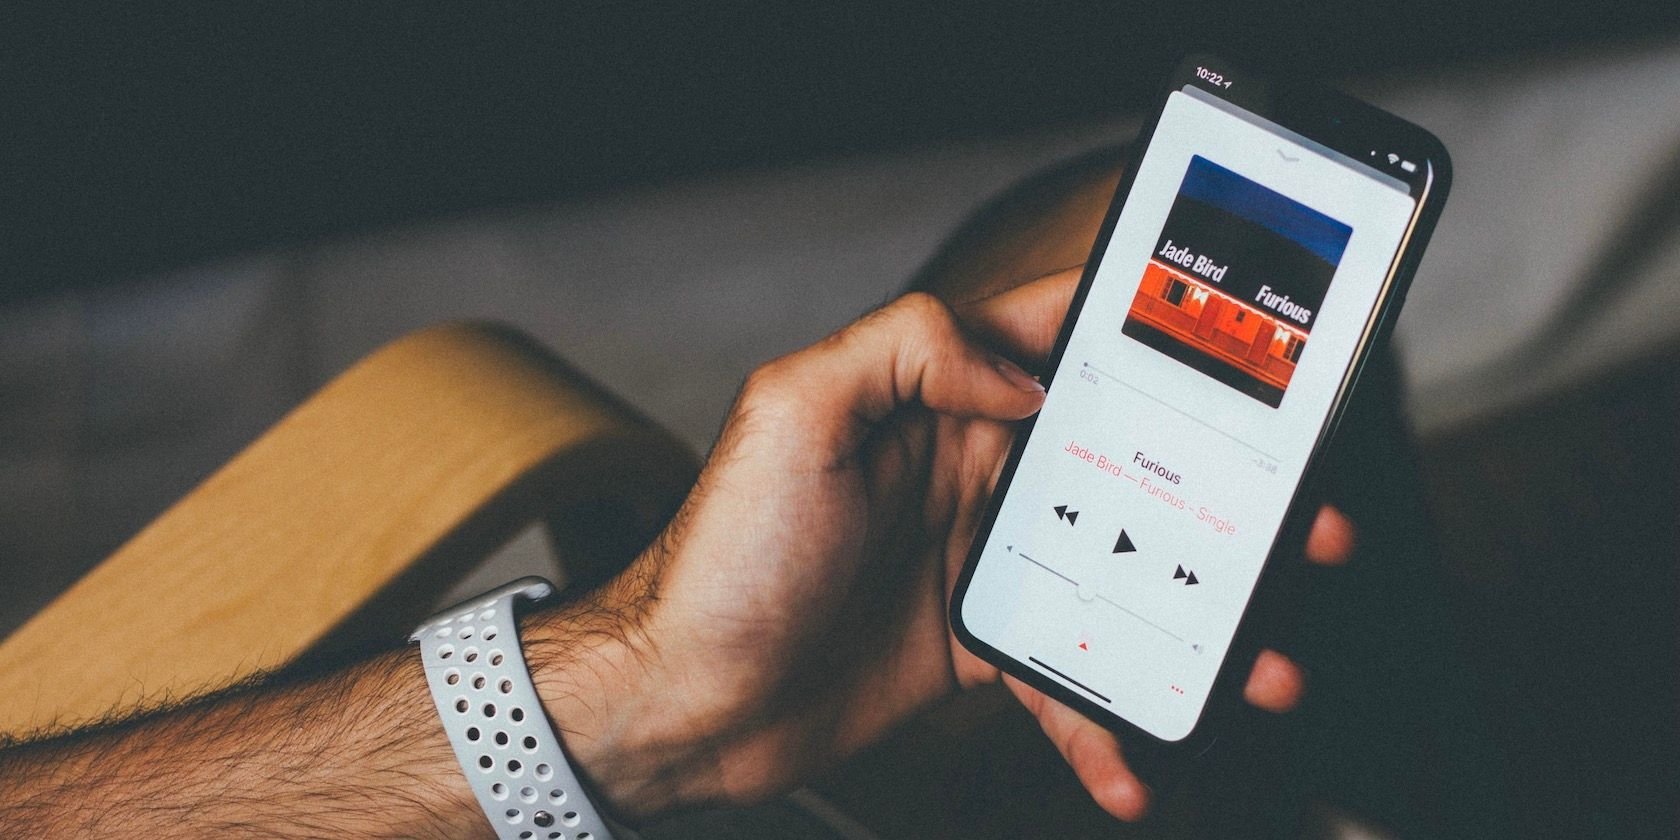 How to Automatically Download Songs Using Smart Playlists on Apple Music